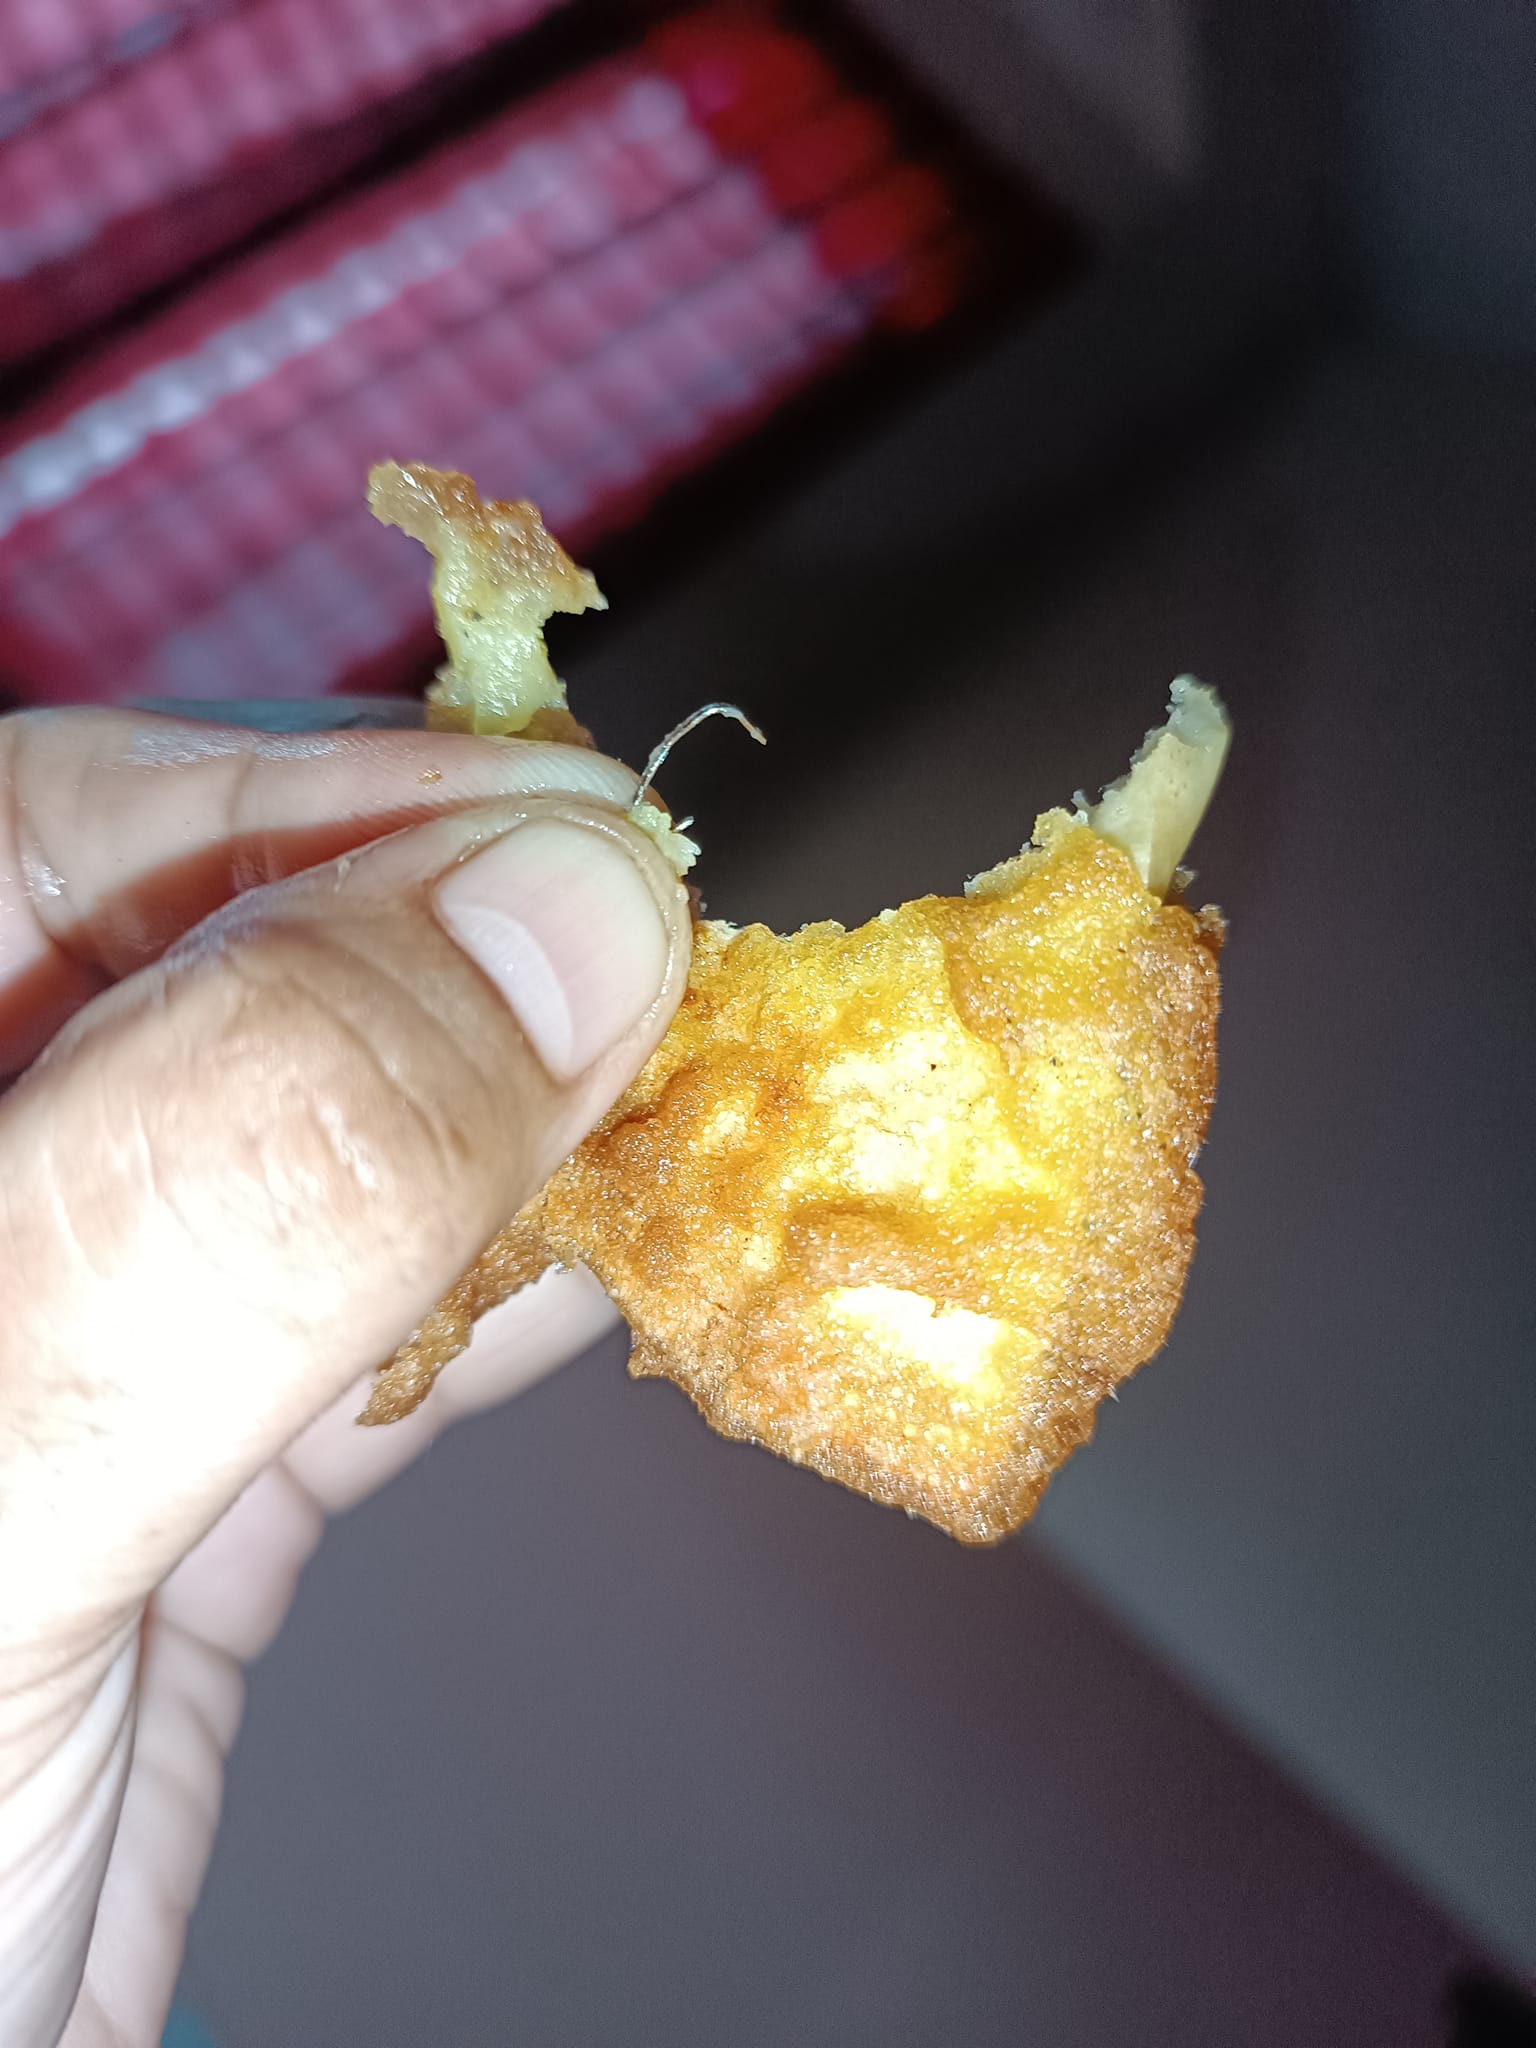 A msian woman showing a staple pin that she found inside the jackfruit fritters she bought from a stall.